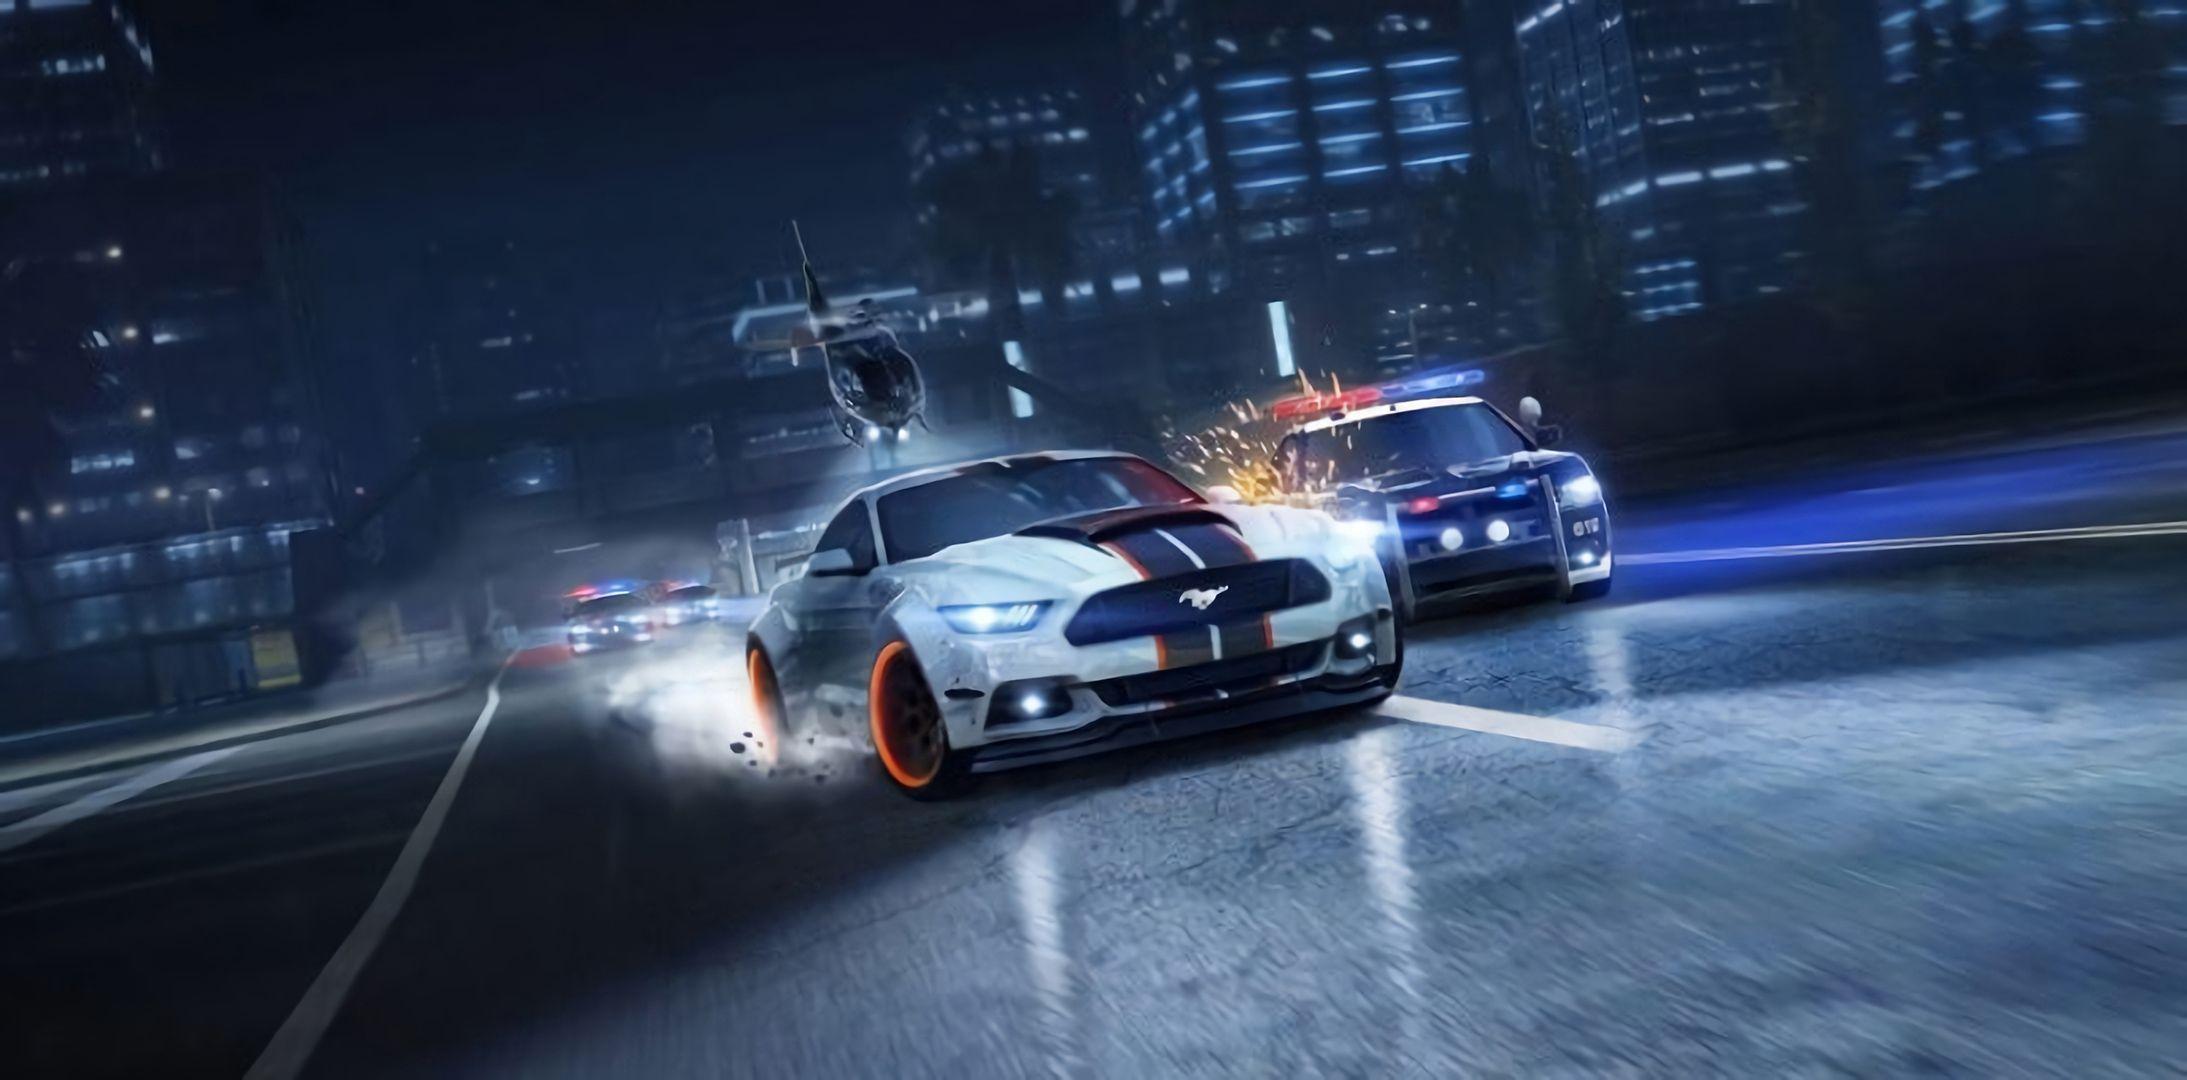 Need For Speed Heat Wallpapers - Top Free Need For Speed Heat ...